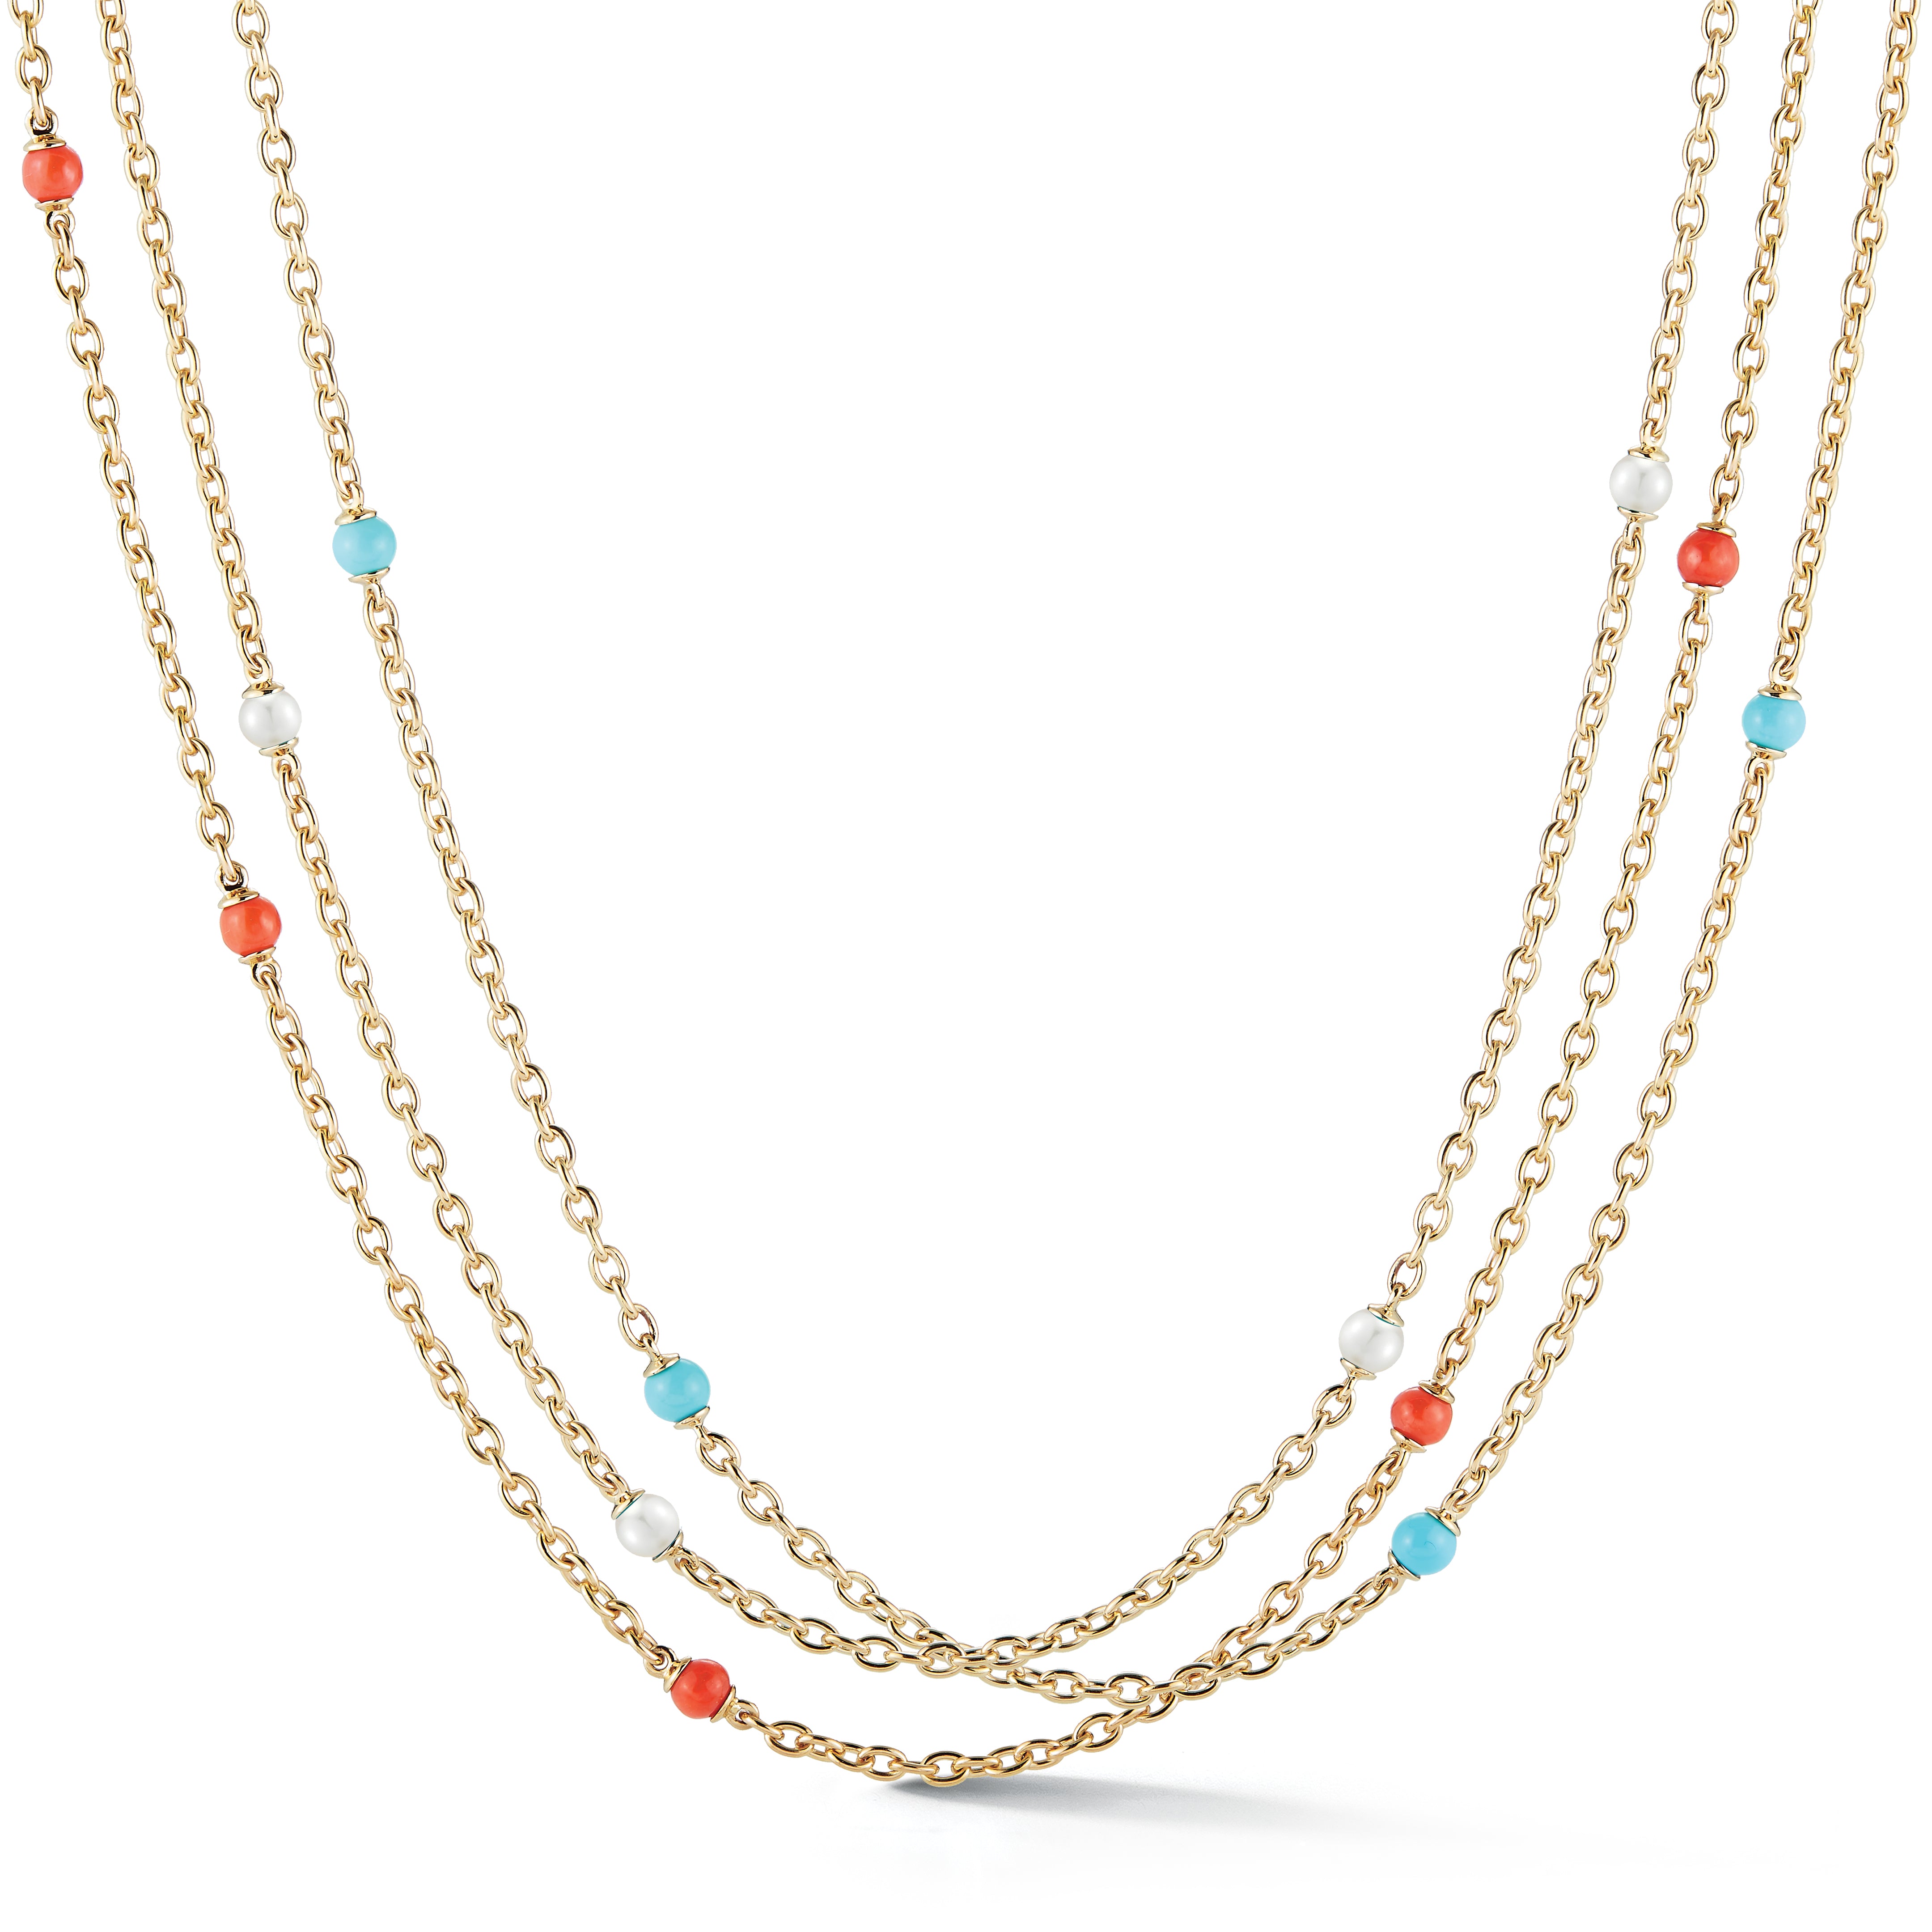 Mini Astro Necklaces in Coral, Pearl & Turquoise